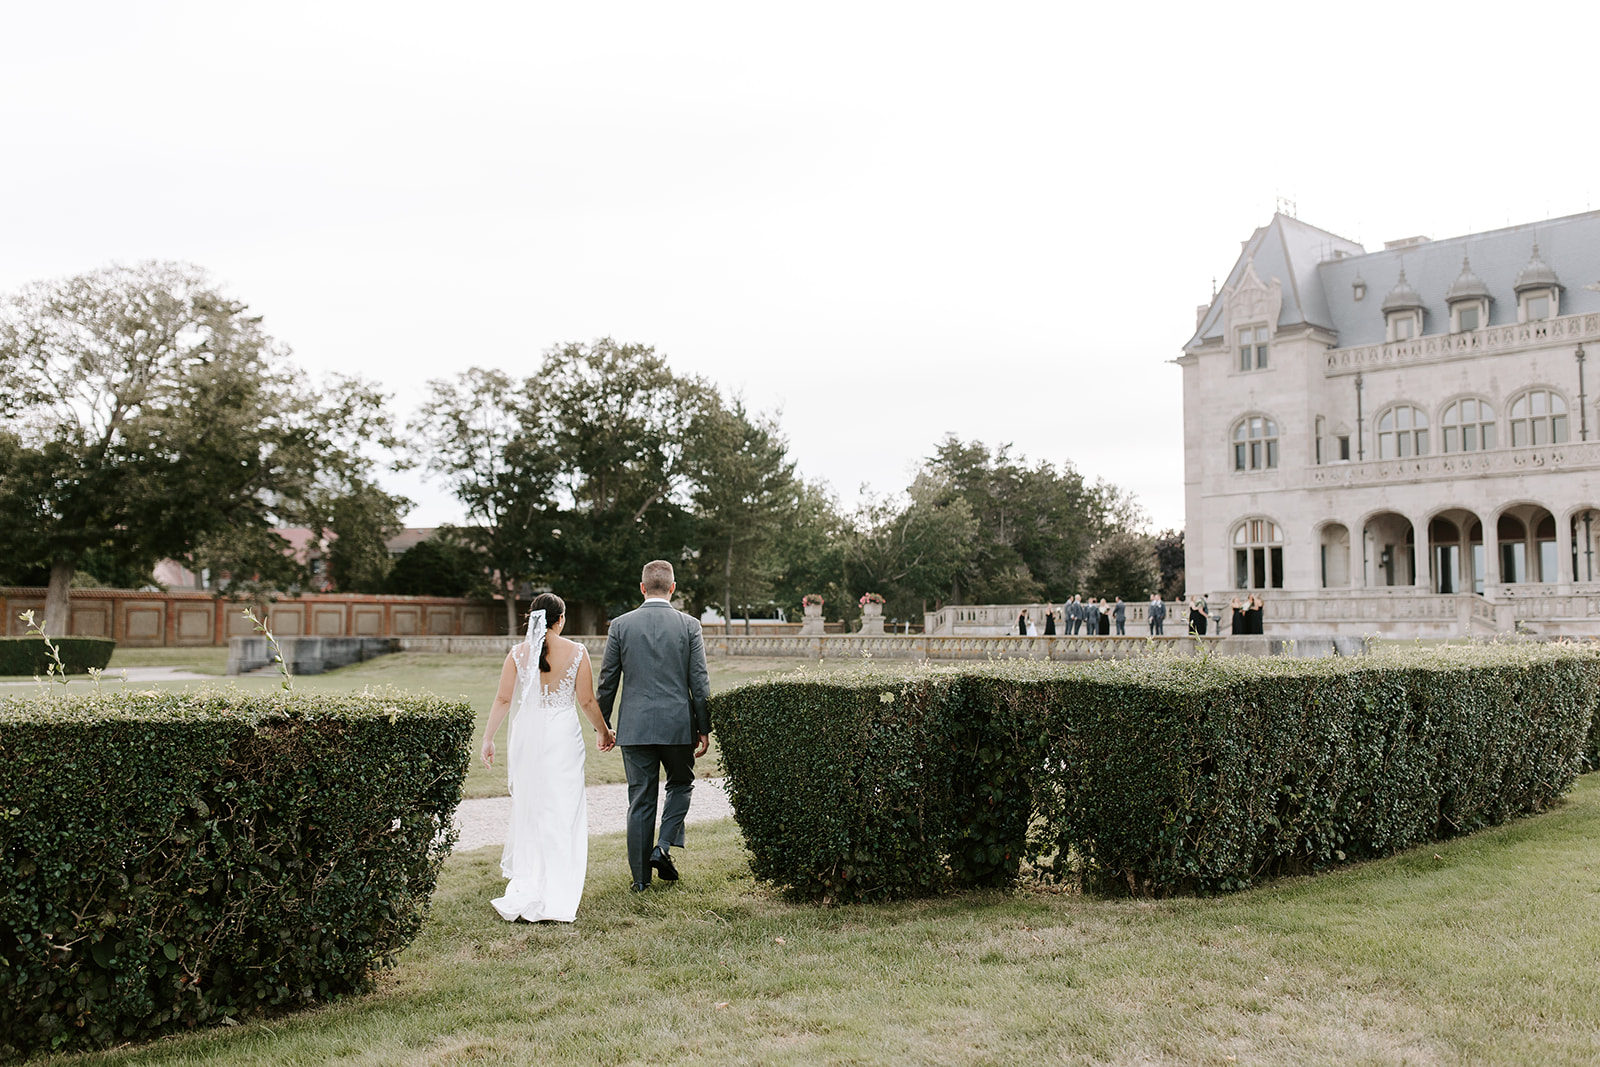 Beautiful bride and groom pose outside their dreamy New England wedding venue